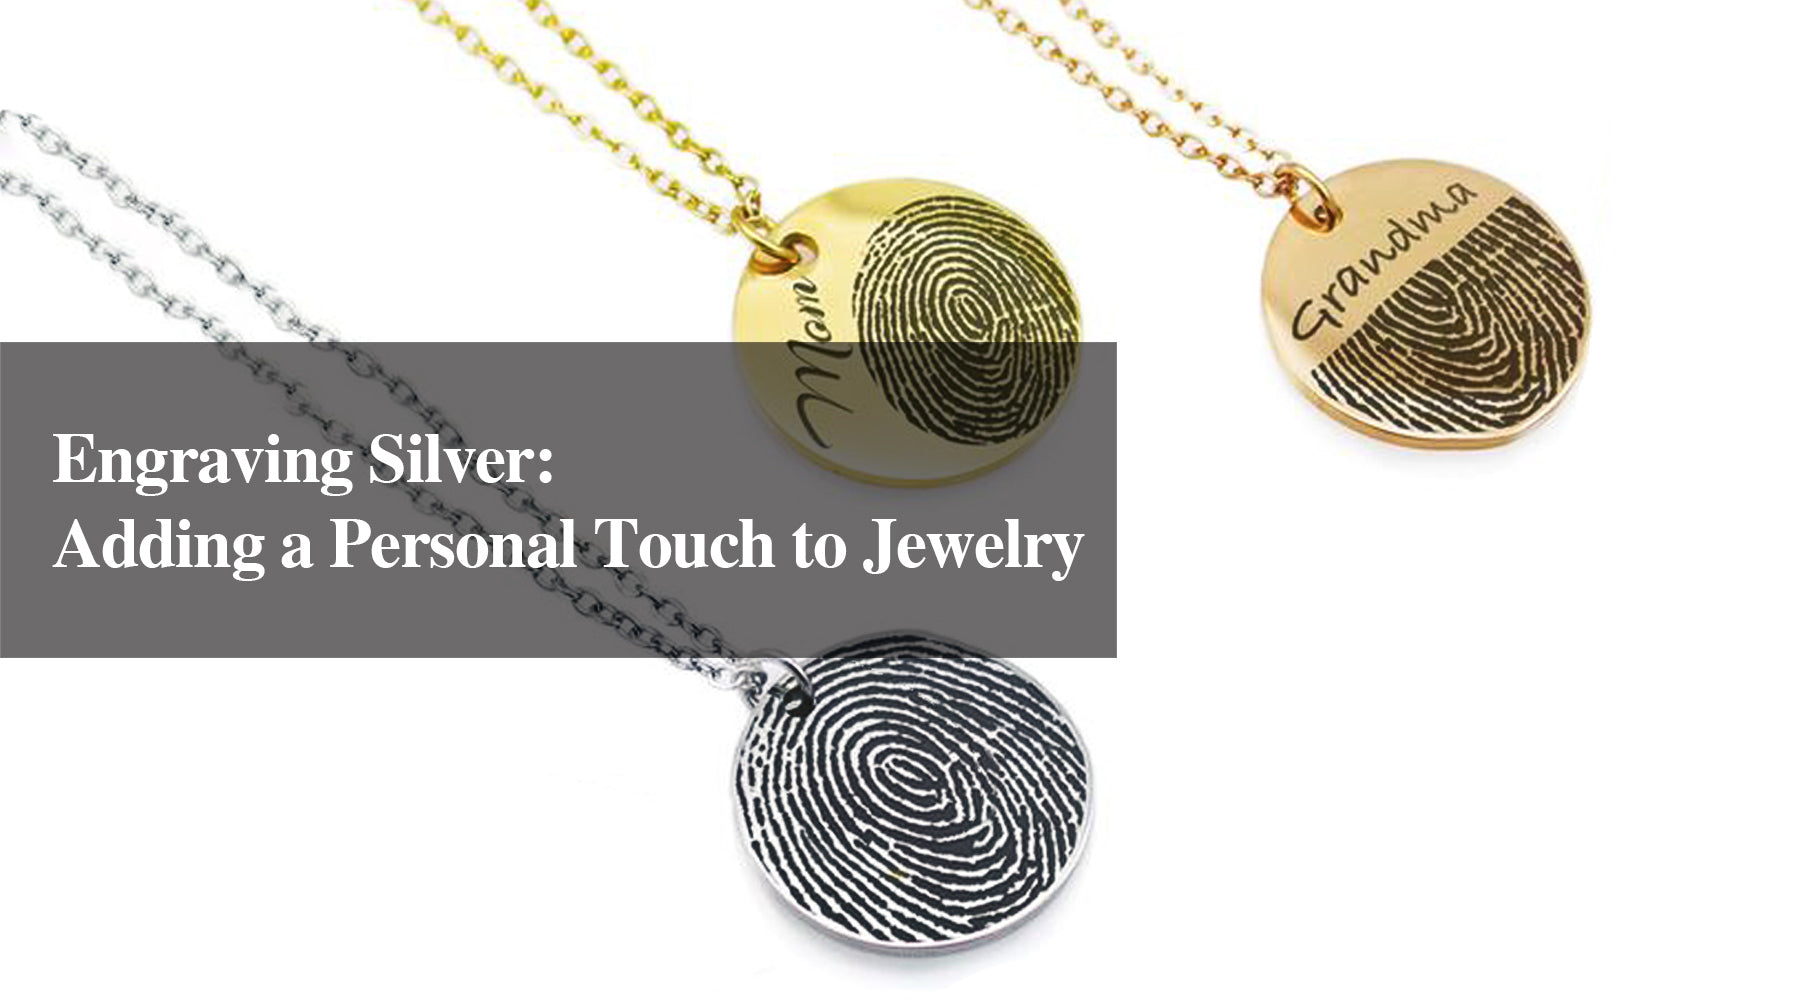 Engraving Silver: Adding a Personal Touch to Jewelry